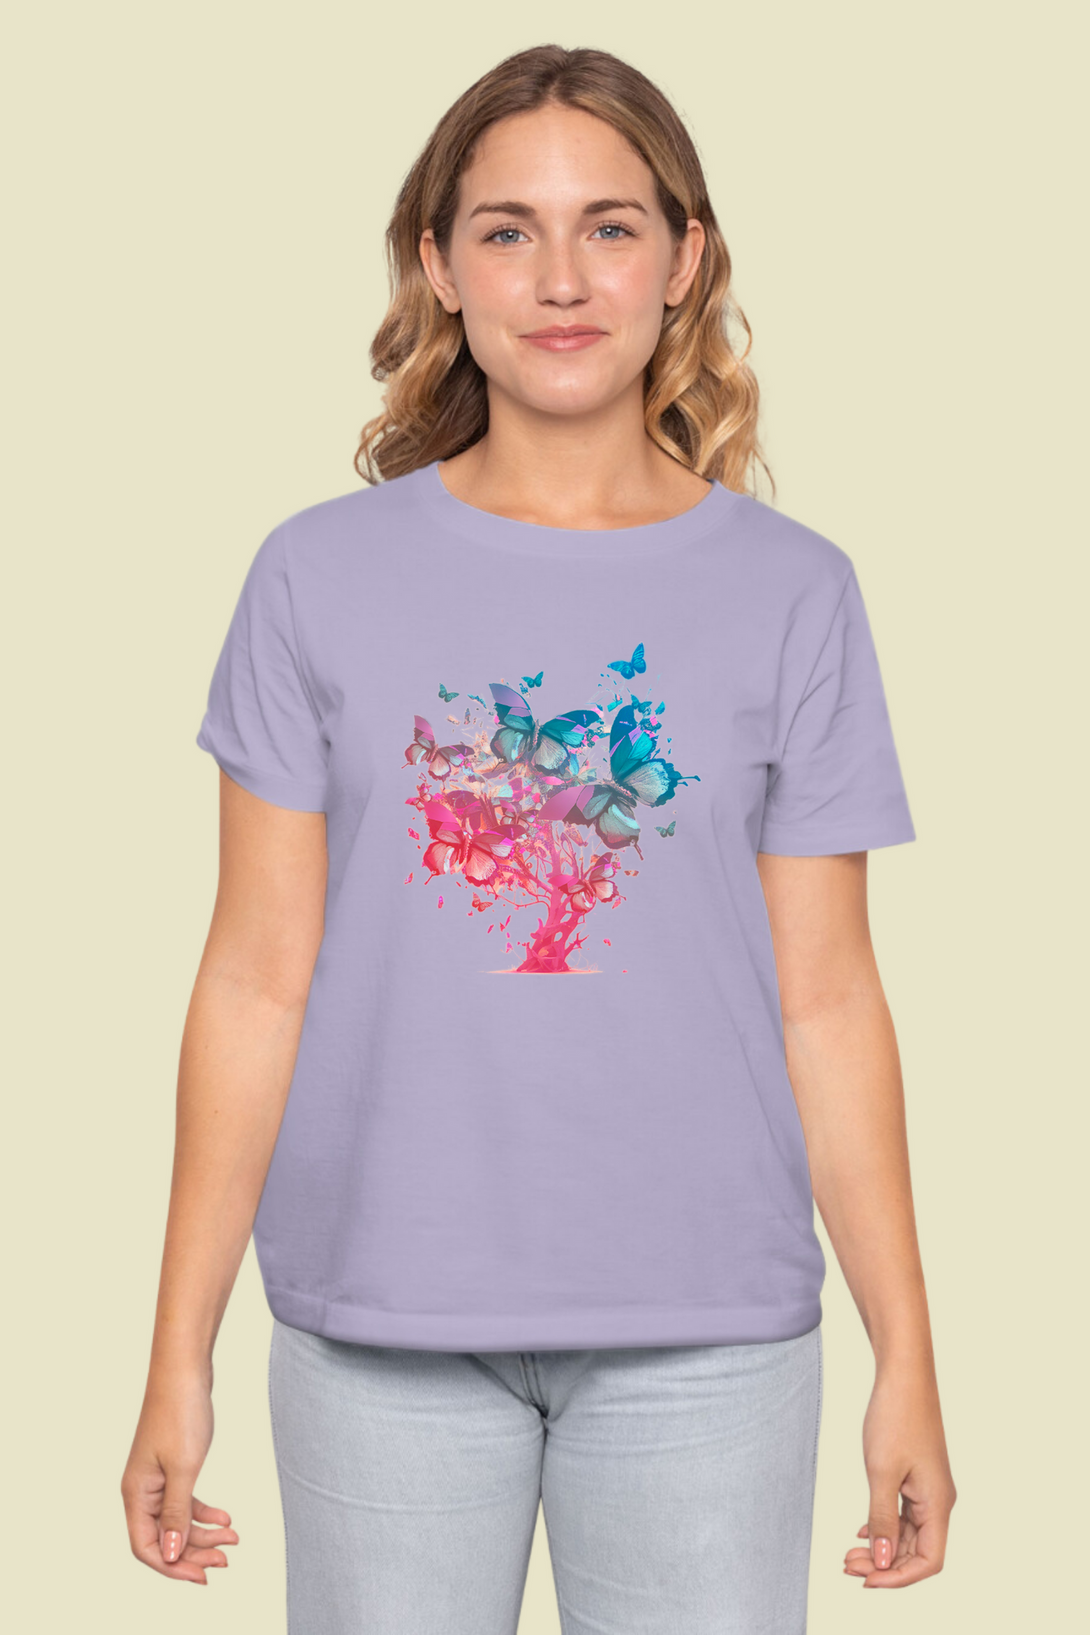 Butterfly Tree Printed T-Shirt For Women - WowWaves - 8